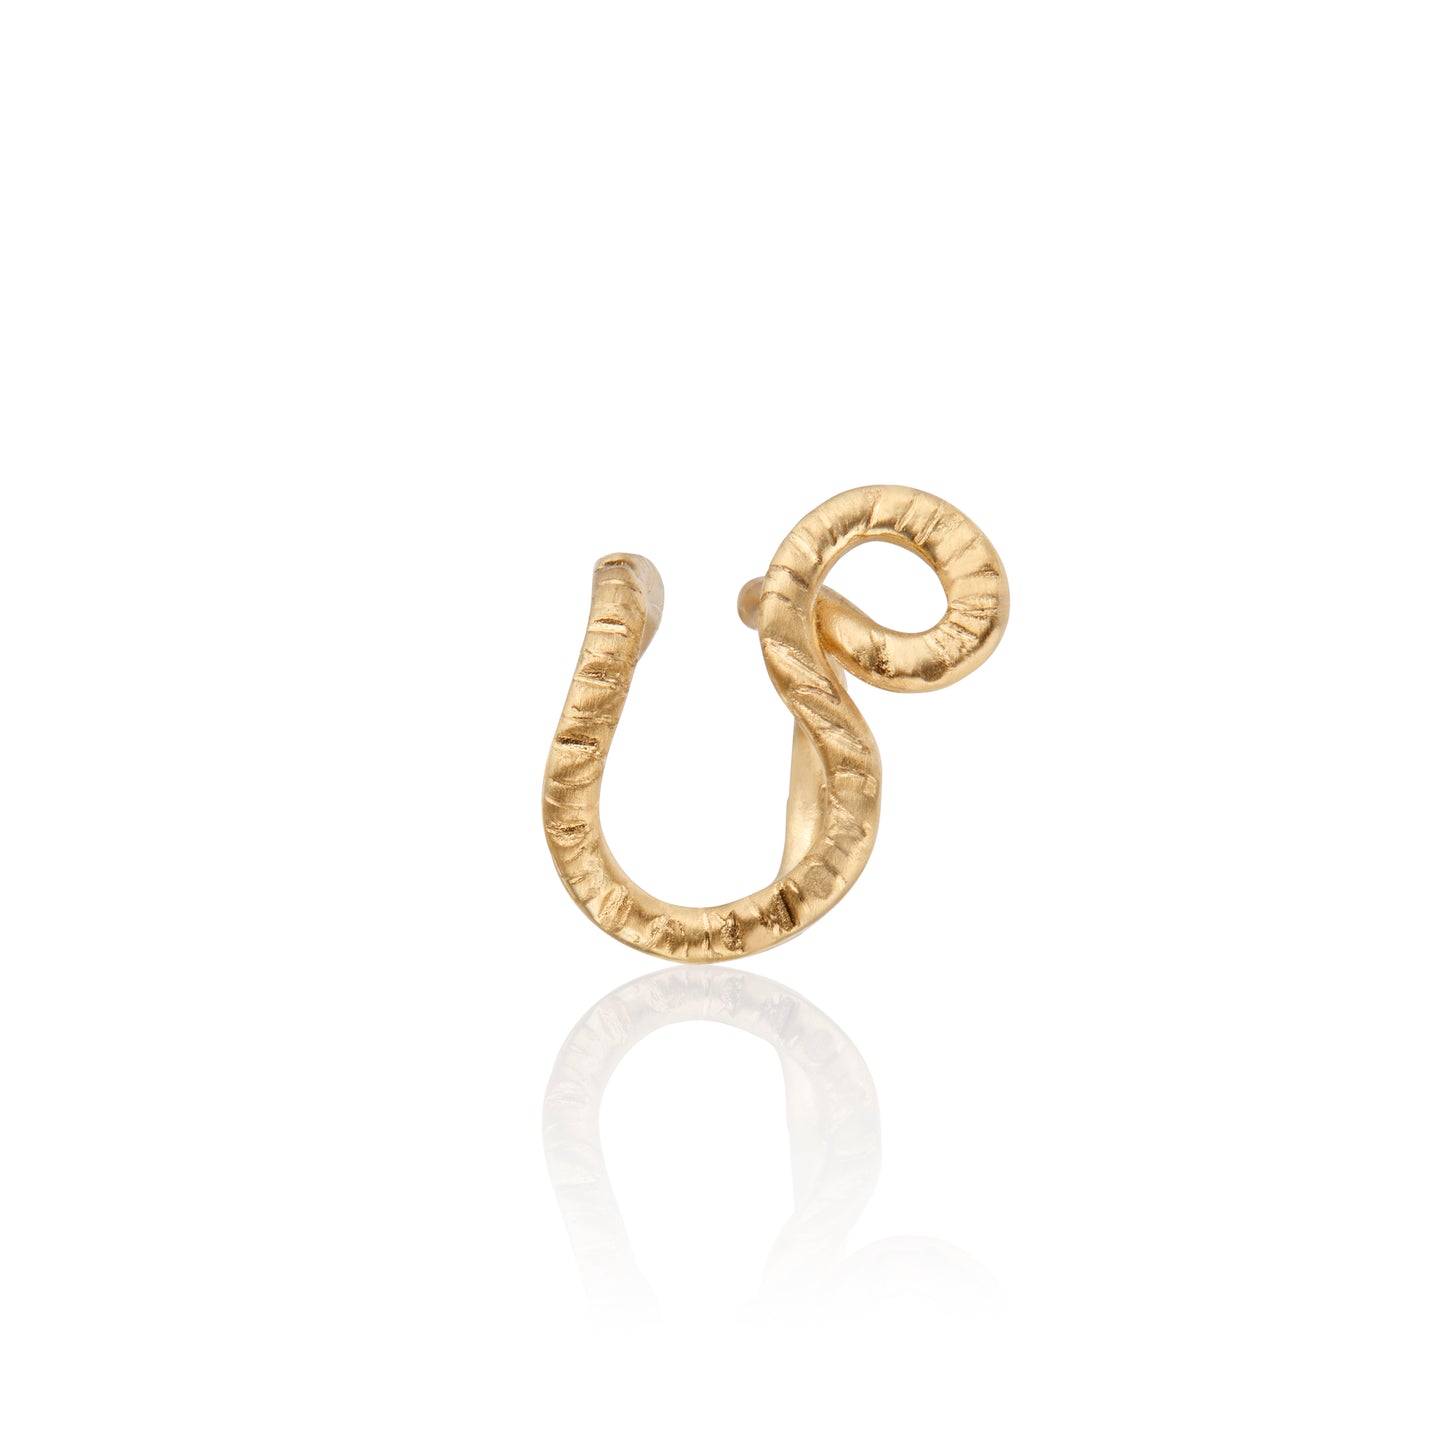 The Youth Partial Ear Cuff in Gold